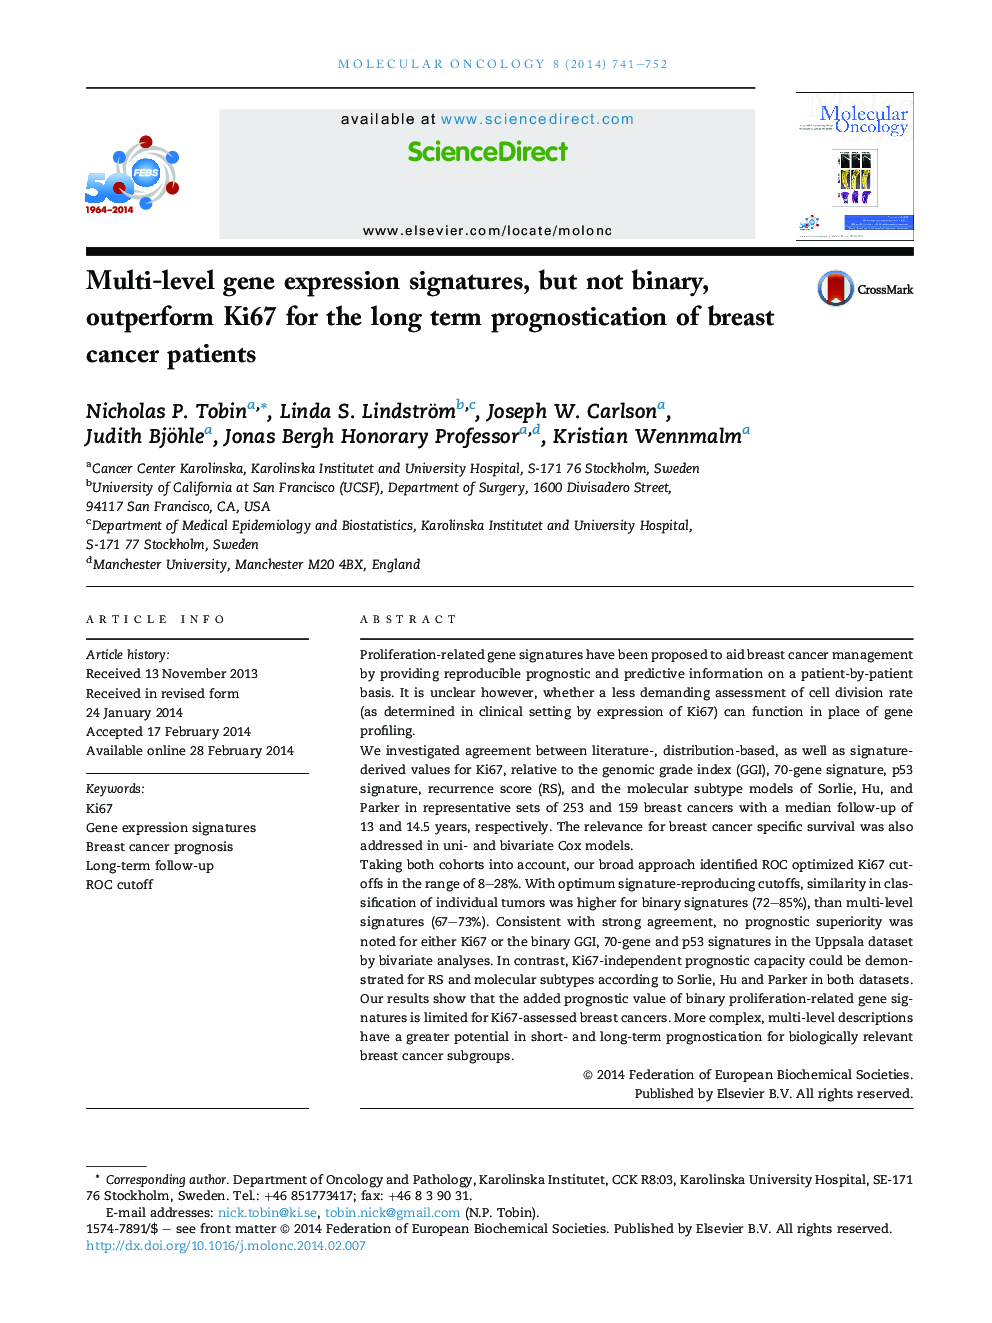 Multi-level gene expression signatures, but not binary, outperform Ki67 for the long term prognostication of breast cancer patients